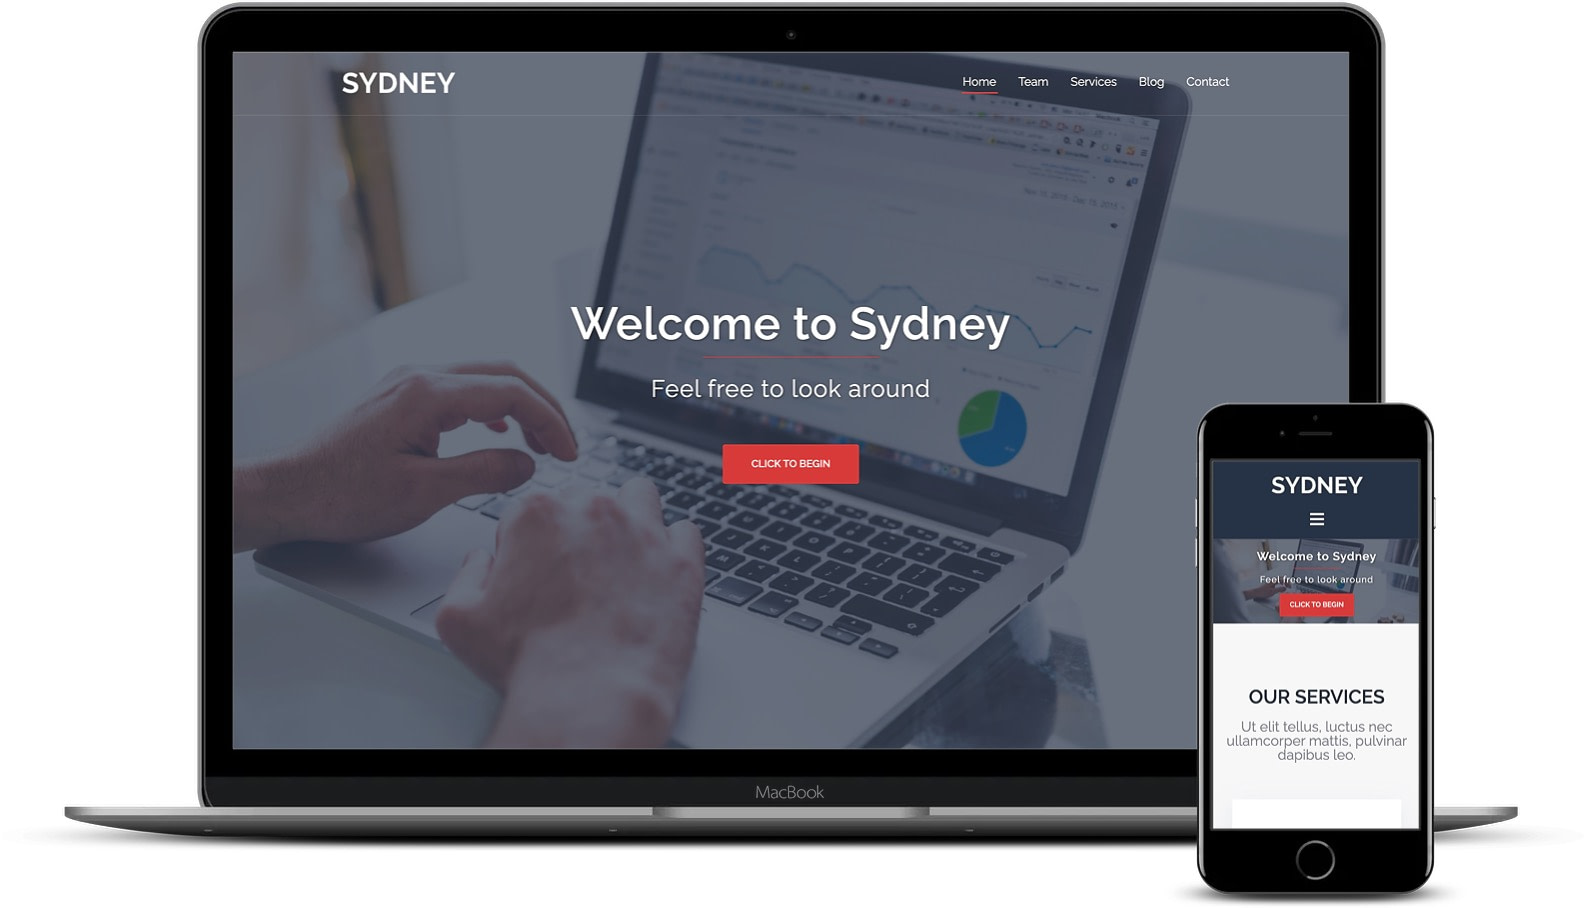 One of the best photography WordPress themes is Sydney